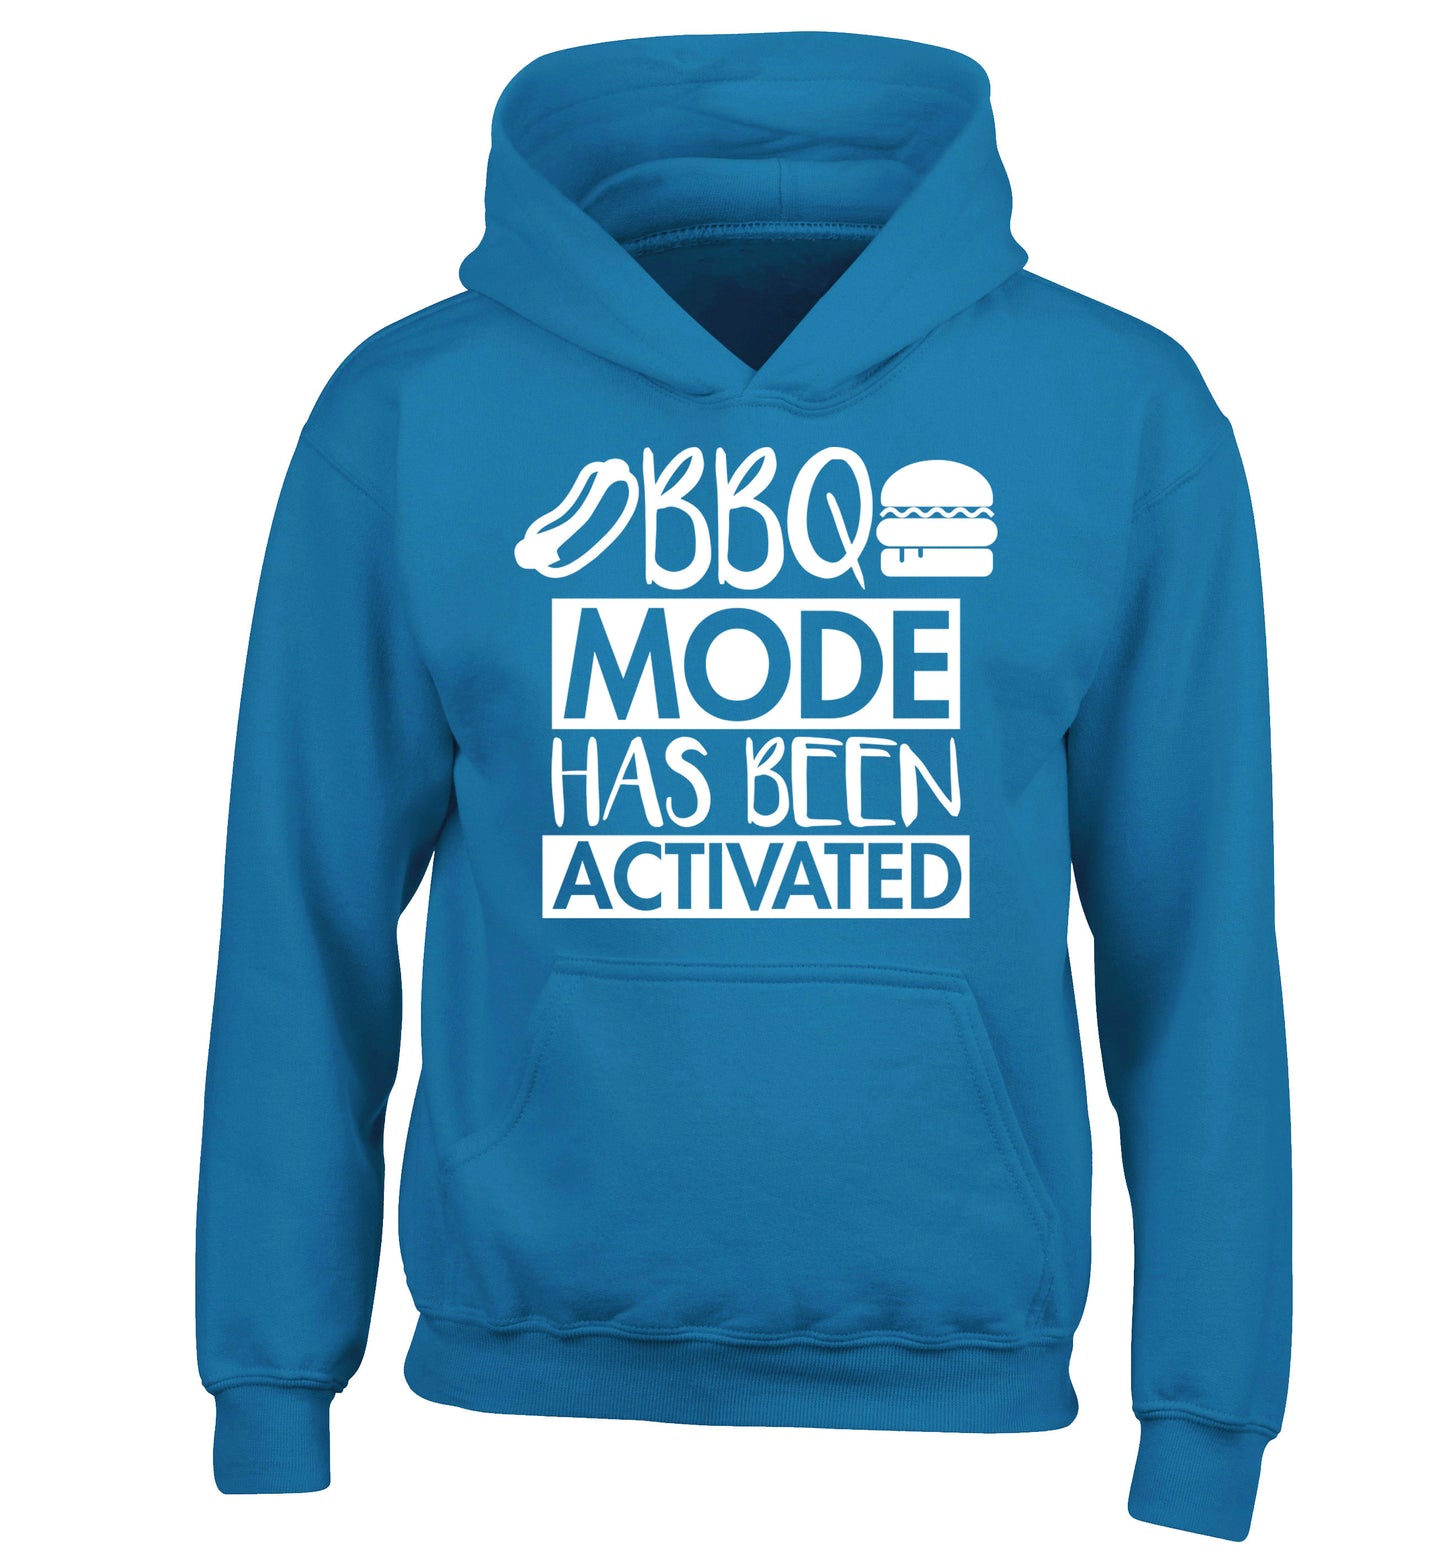 Bbq mode has been activated children's blue hoodie 12-14 Years